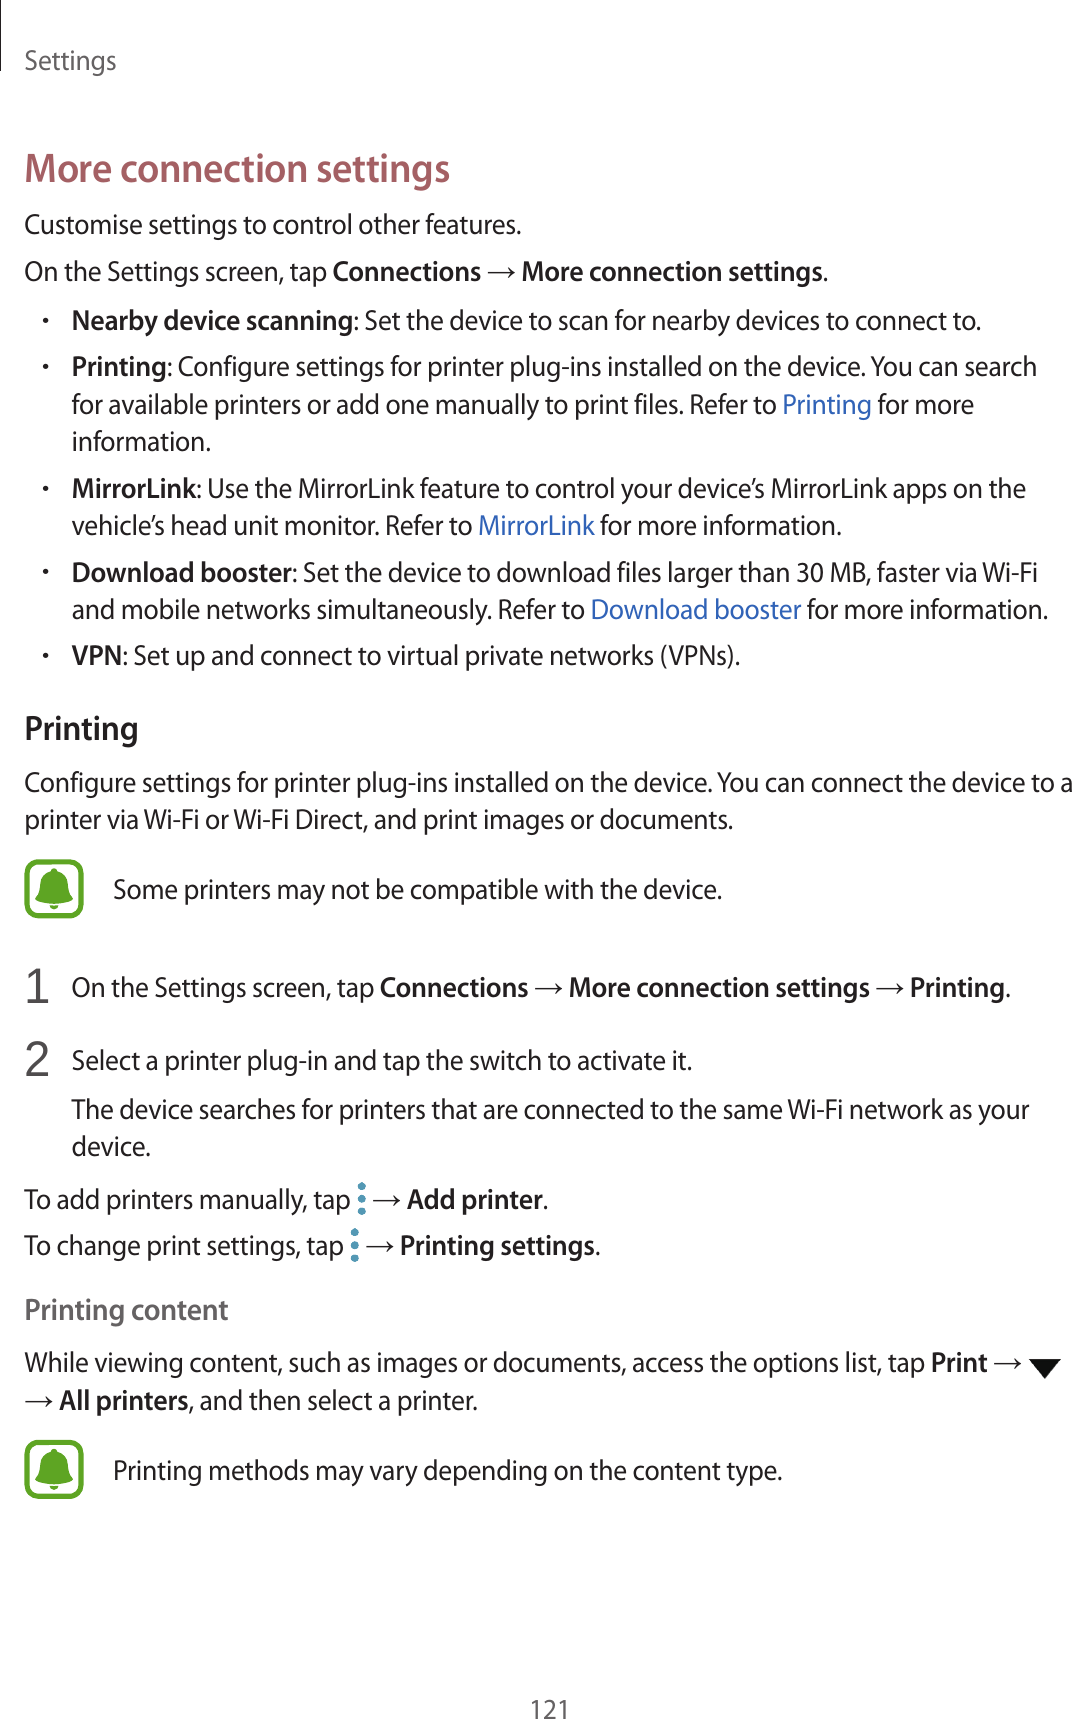 Settings121More connection settingsCustomise settings to control other features.On the Settings screen, tap Connections → More connection settings.•Nearby device scanning: Set the device to scan for nearby devices to connect to.•Printing: Configure settings for printer plug-ins installed on the device. You can search for available printers or add one manually to print files. Refer to Printing for more information.•MirrorLink: Use the MirrorLink feature to control your device’s MirrorLink apps on the vehicle’s head unit monitor. Refer to MirrorLink for more information.•Download booster: Set the device to download files larger than 30 MB, faster via Wi-Fi and mobile networks simultaneously. Refer to Download booster for more information.•VPN: Set up and connect to virtual private networks (VPNs).PrintingConfigure settings for printer plug-ins installed on the device. You can connect the device to a printer via Wi-Fi or Wi-Fi Direct, and print images or documents.Some printers may not be compatible with the device.1  On the Settings screen, tap Connections → More connection settings → Printing.2  Select a printer plug-in and tap the switch to activate it.The device searches for printers that are connected to the same Wi-Fi network as your device.To add printers manually, tap   → Add printer.To change print settings, tap   → Printing settings.Printing contentWhile viewing content, such as images or documents, access the options list, tap Print →   → All printers, and then select a printer.Printing methods may vary depending on the content type.